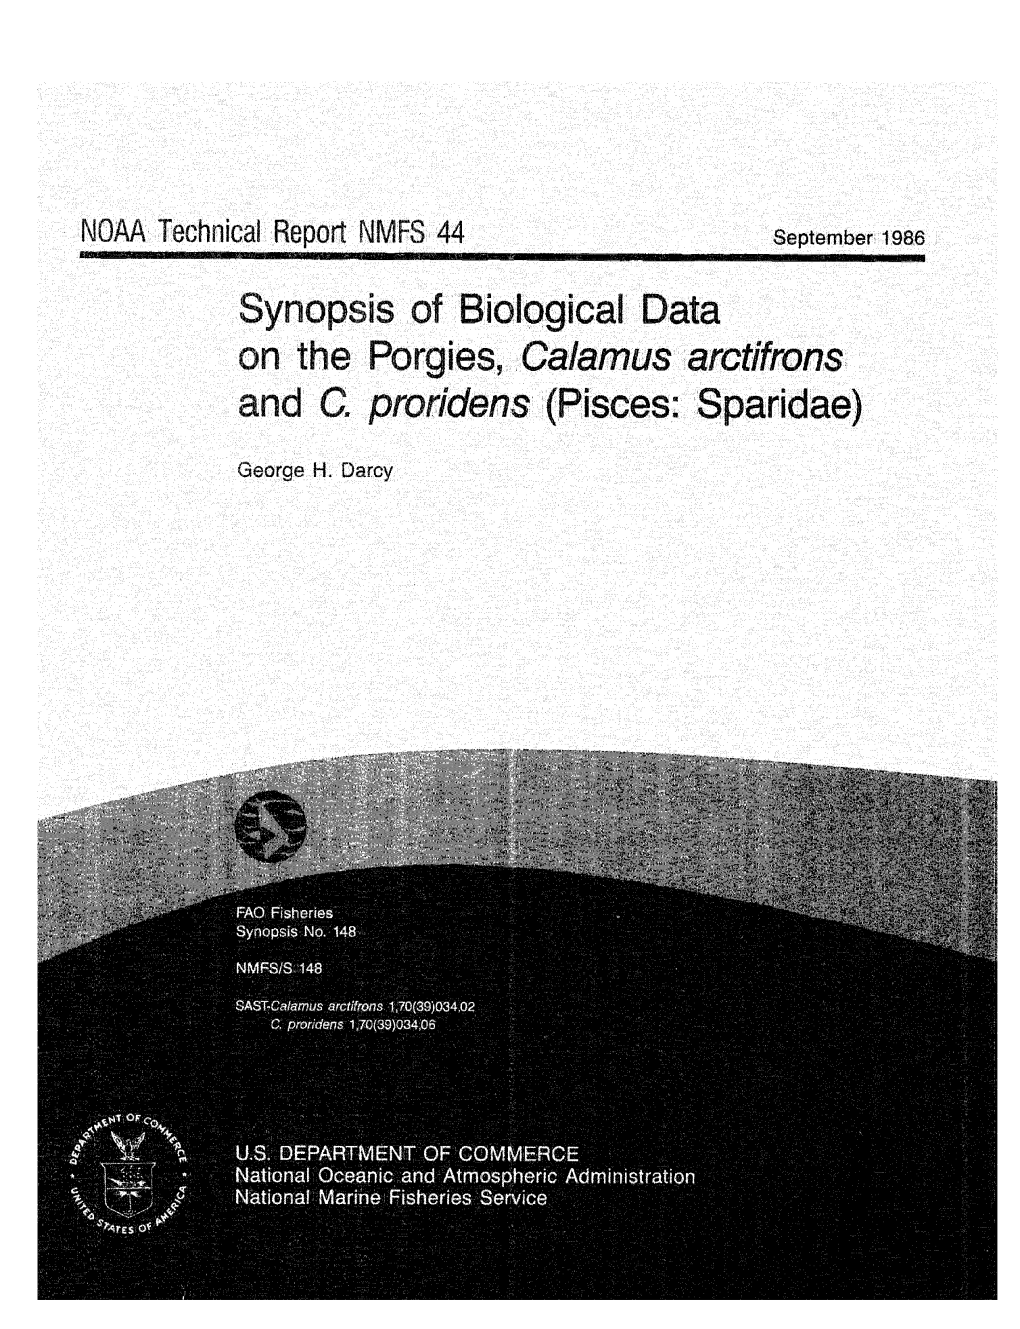 Synopsis of Biological Data on the Progies, Calamus Arctifrons and C